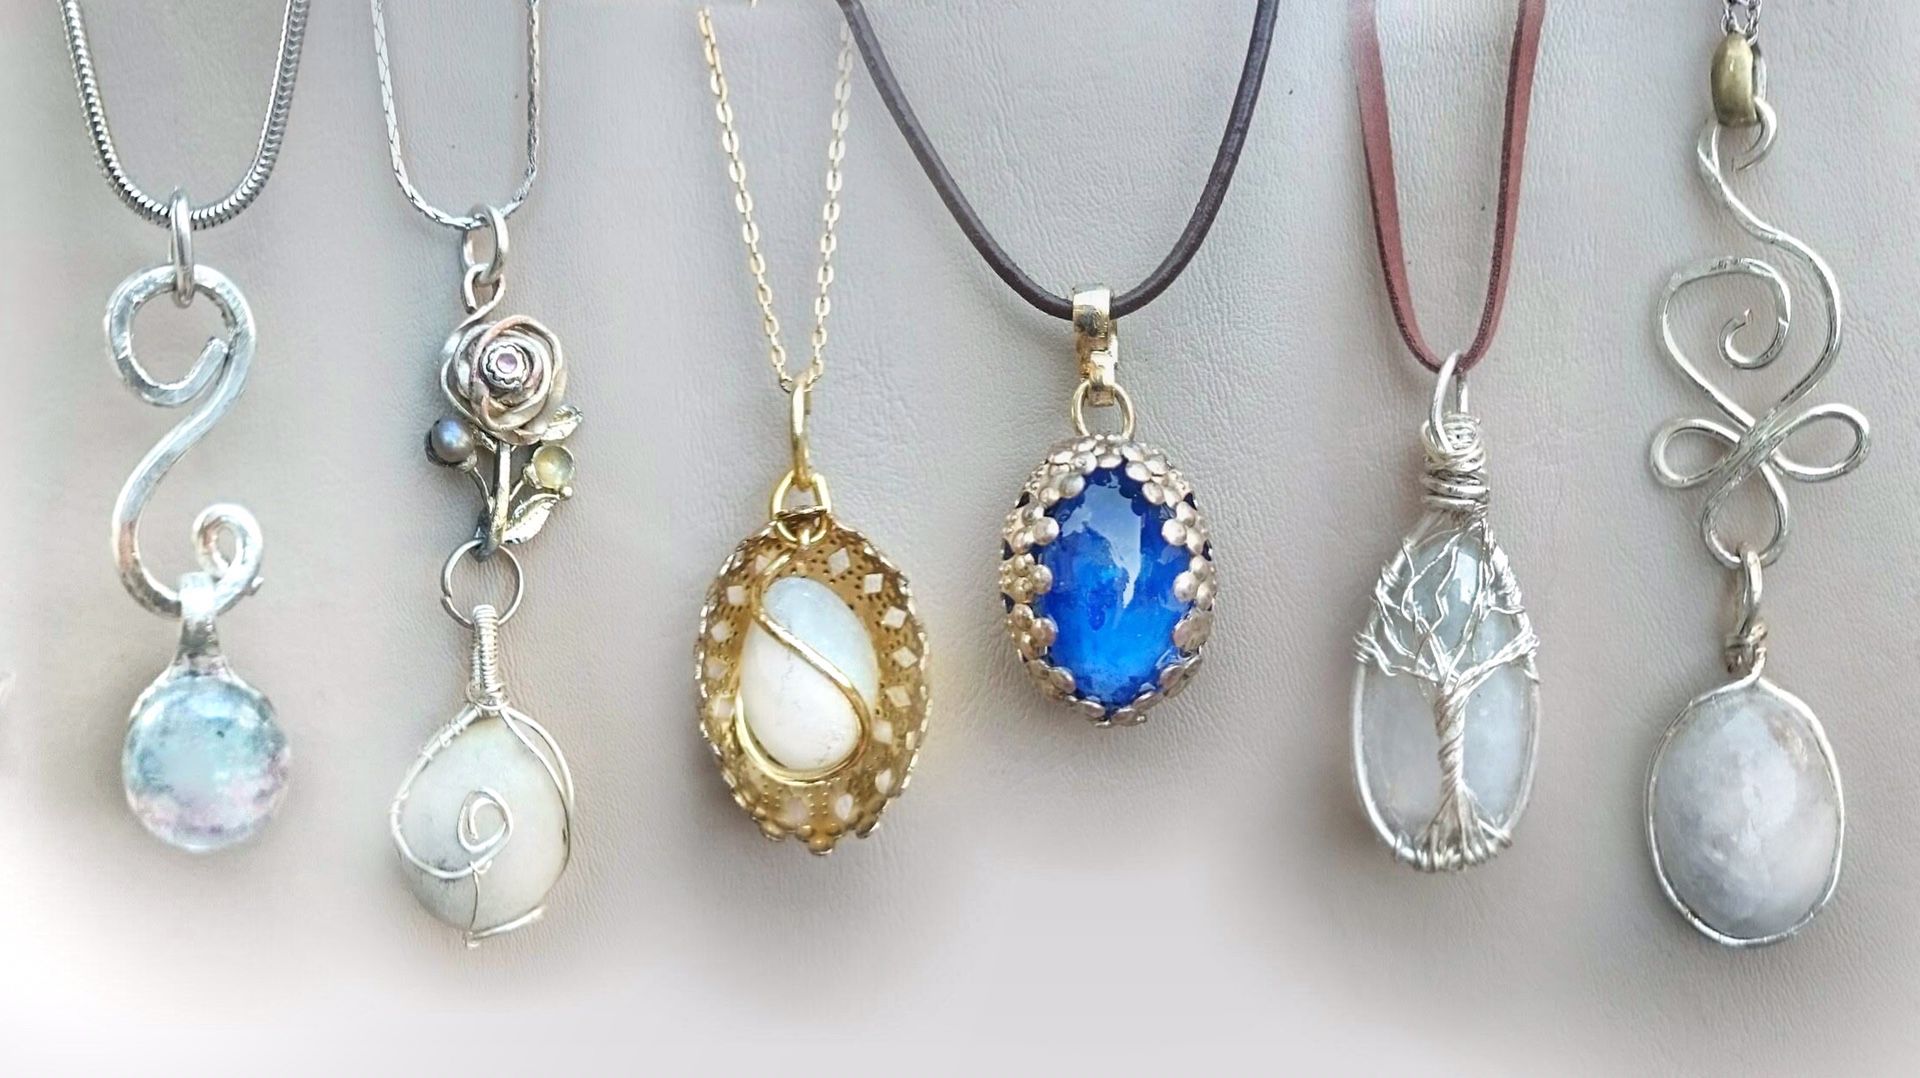 Eye Catching Handcrafted Egg Pendant Necklaces